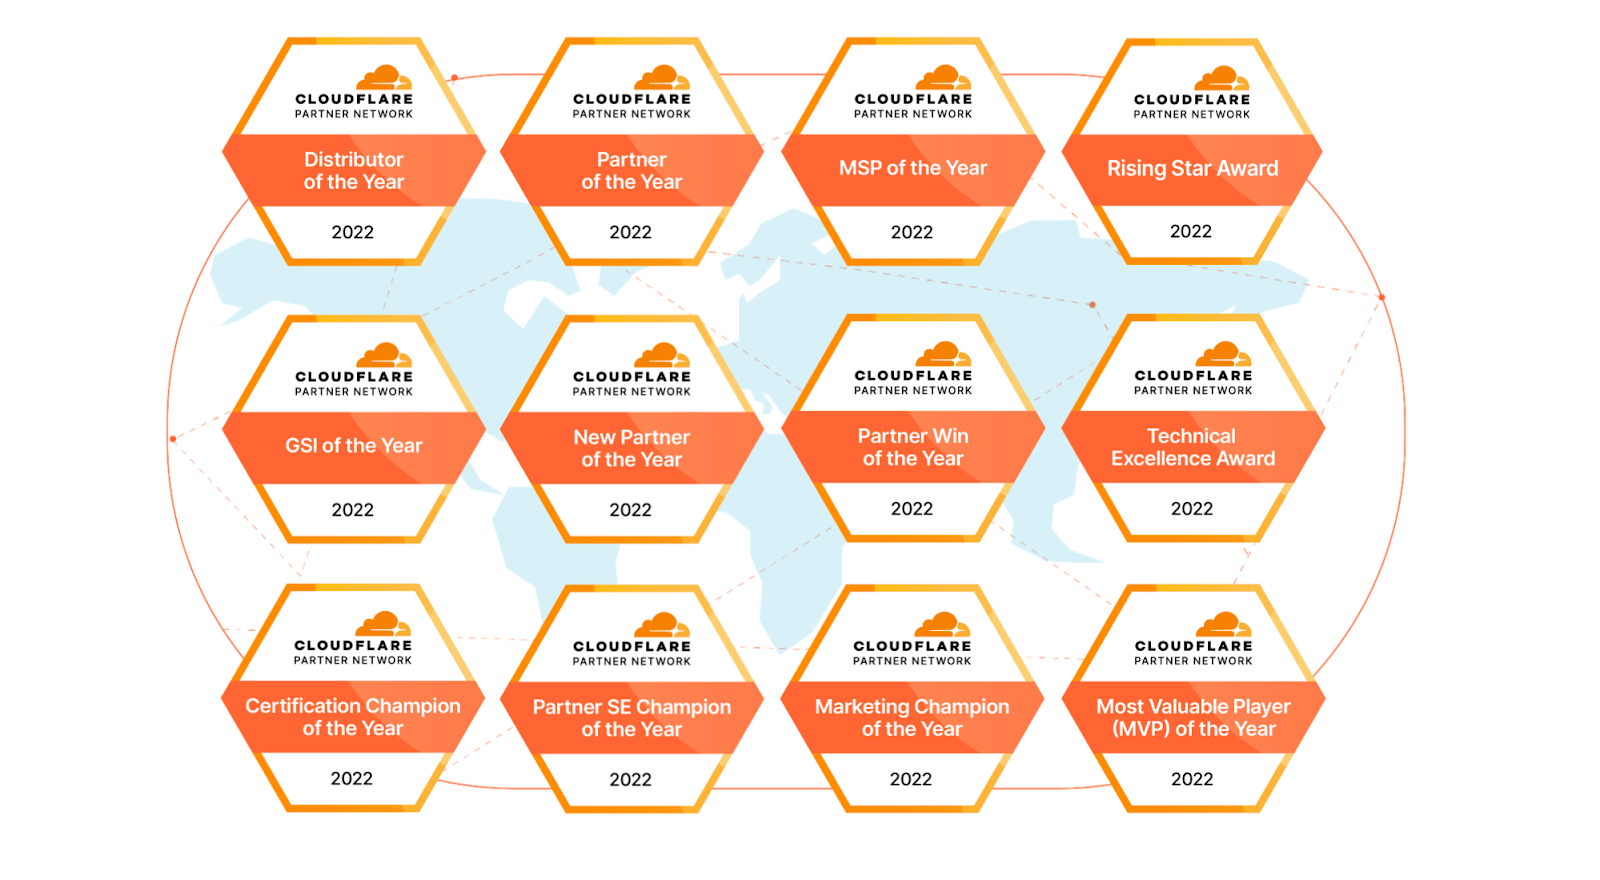 Cloudflare’s Channel Partner Award winners of 2022